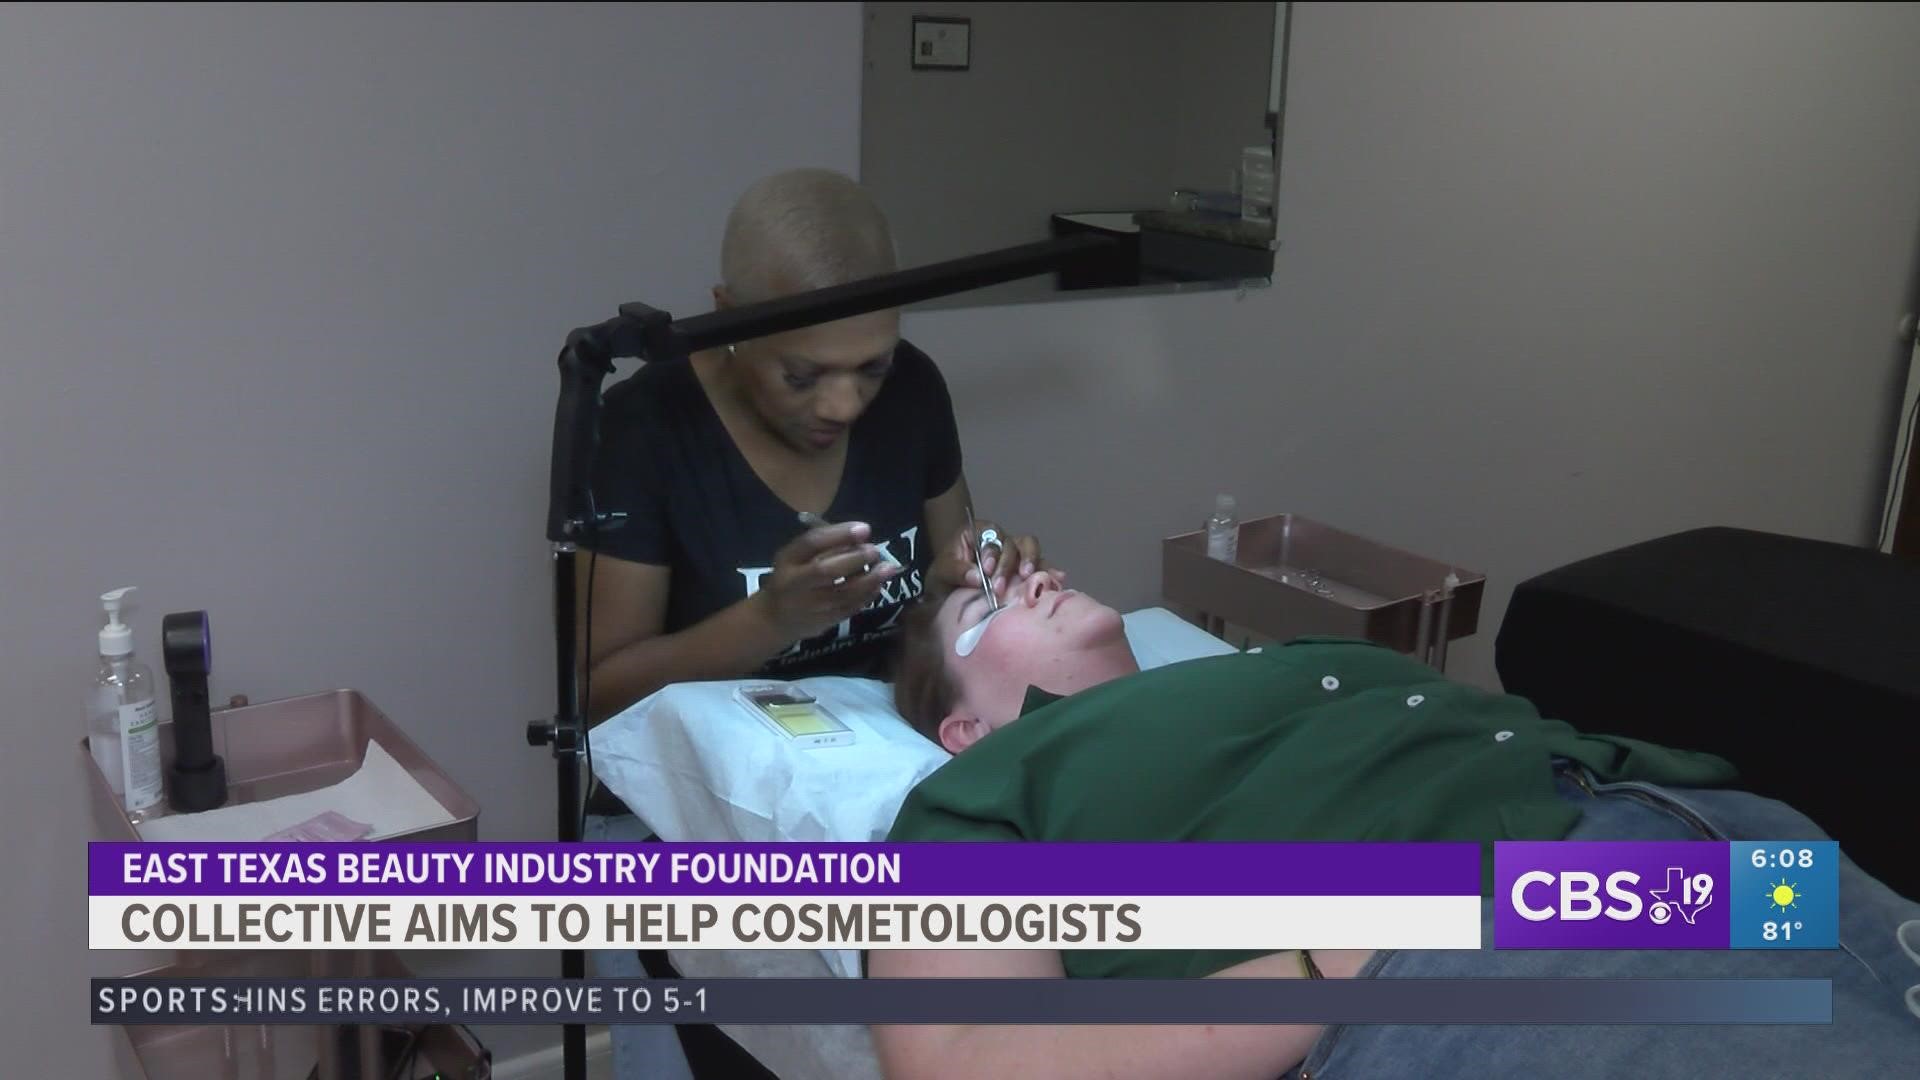 The collaboration named the "East Texas Beauty Industry Foundation" aims to help aspiring cosmetologists in under-served areas